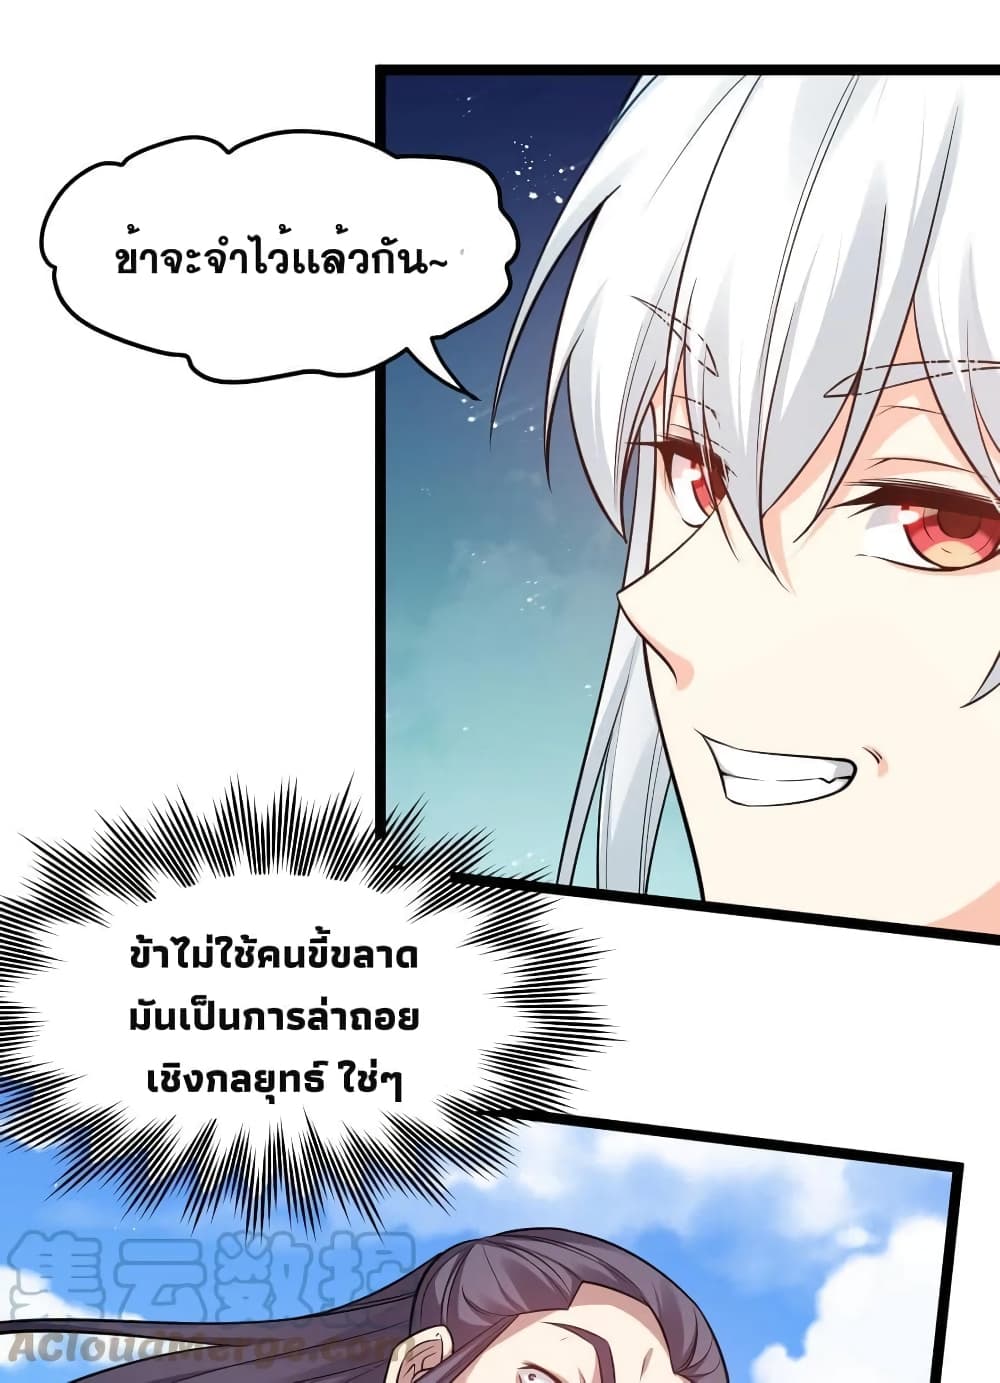 Godsian Masian from Another World ตอนที่ 103 (18)